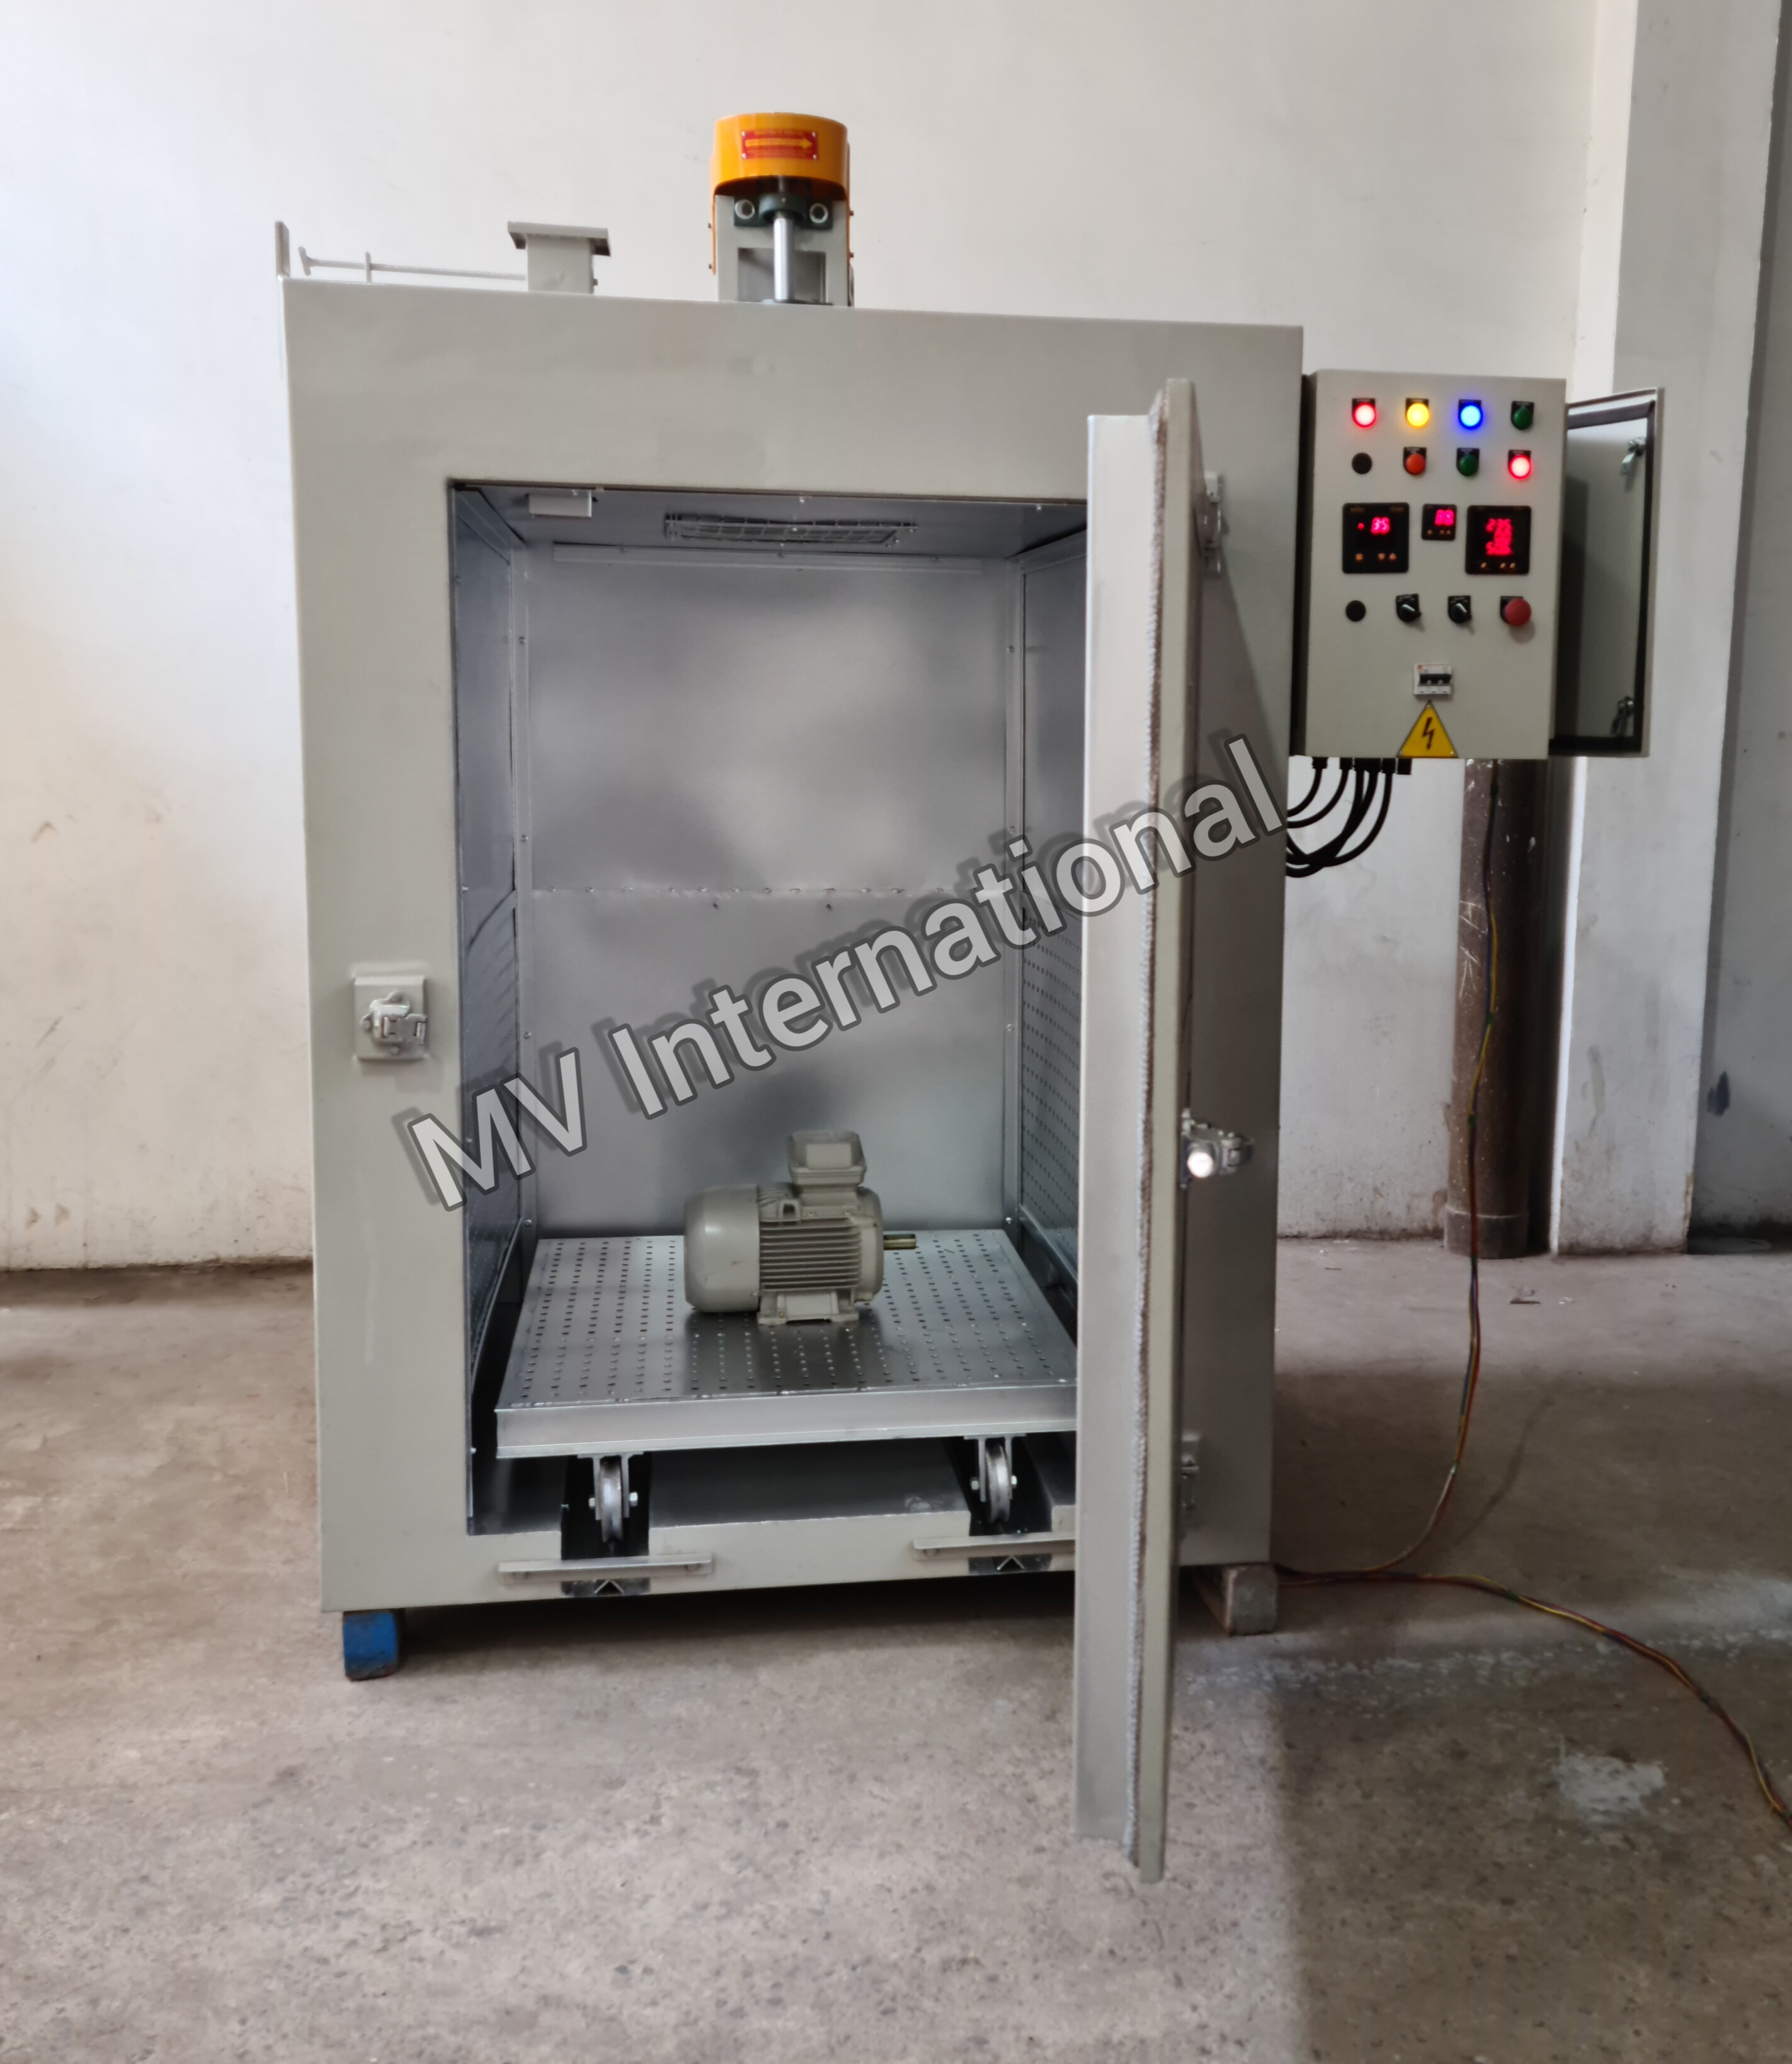 https://www.industrialoven.com/images/product/electric-motor-drying-oven1.jpg